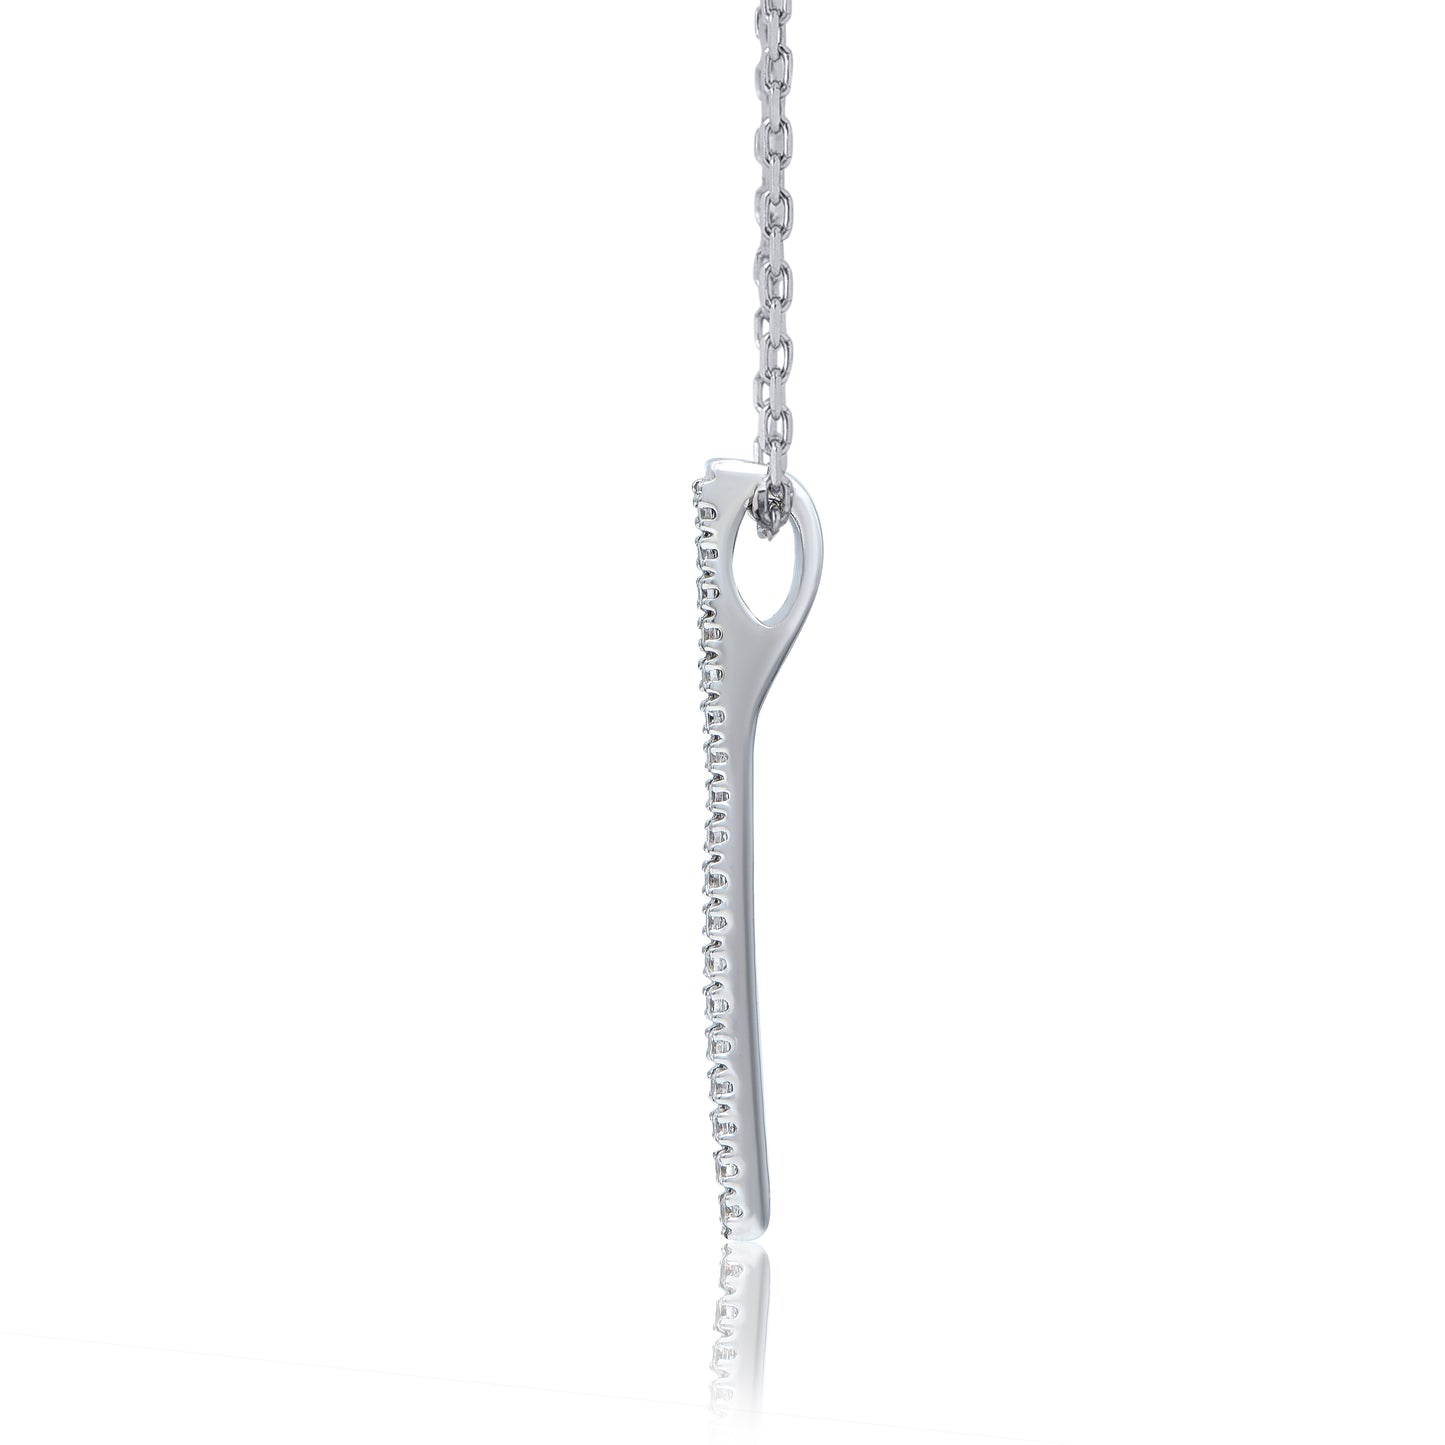 Vertical Bar Pendant Necklace in 925 Sterling Silver